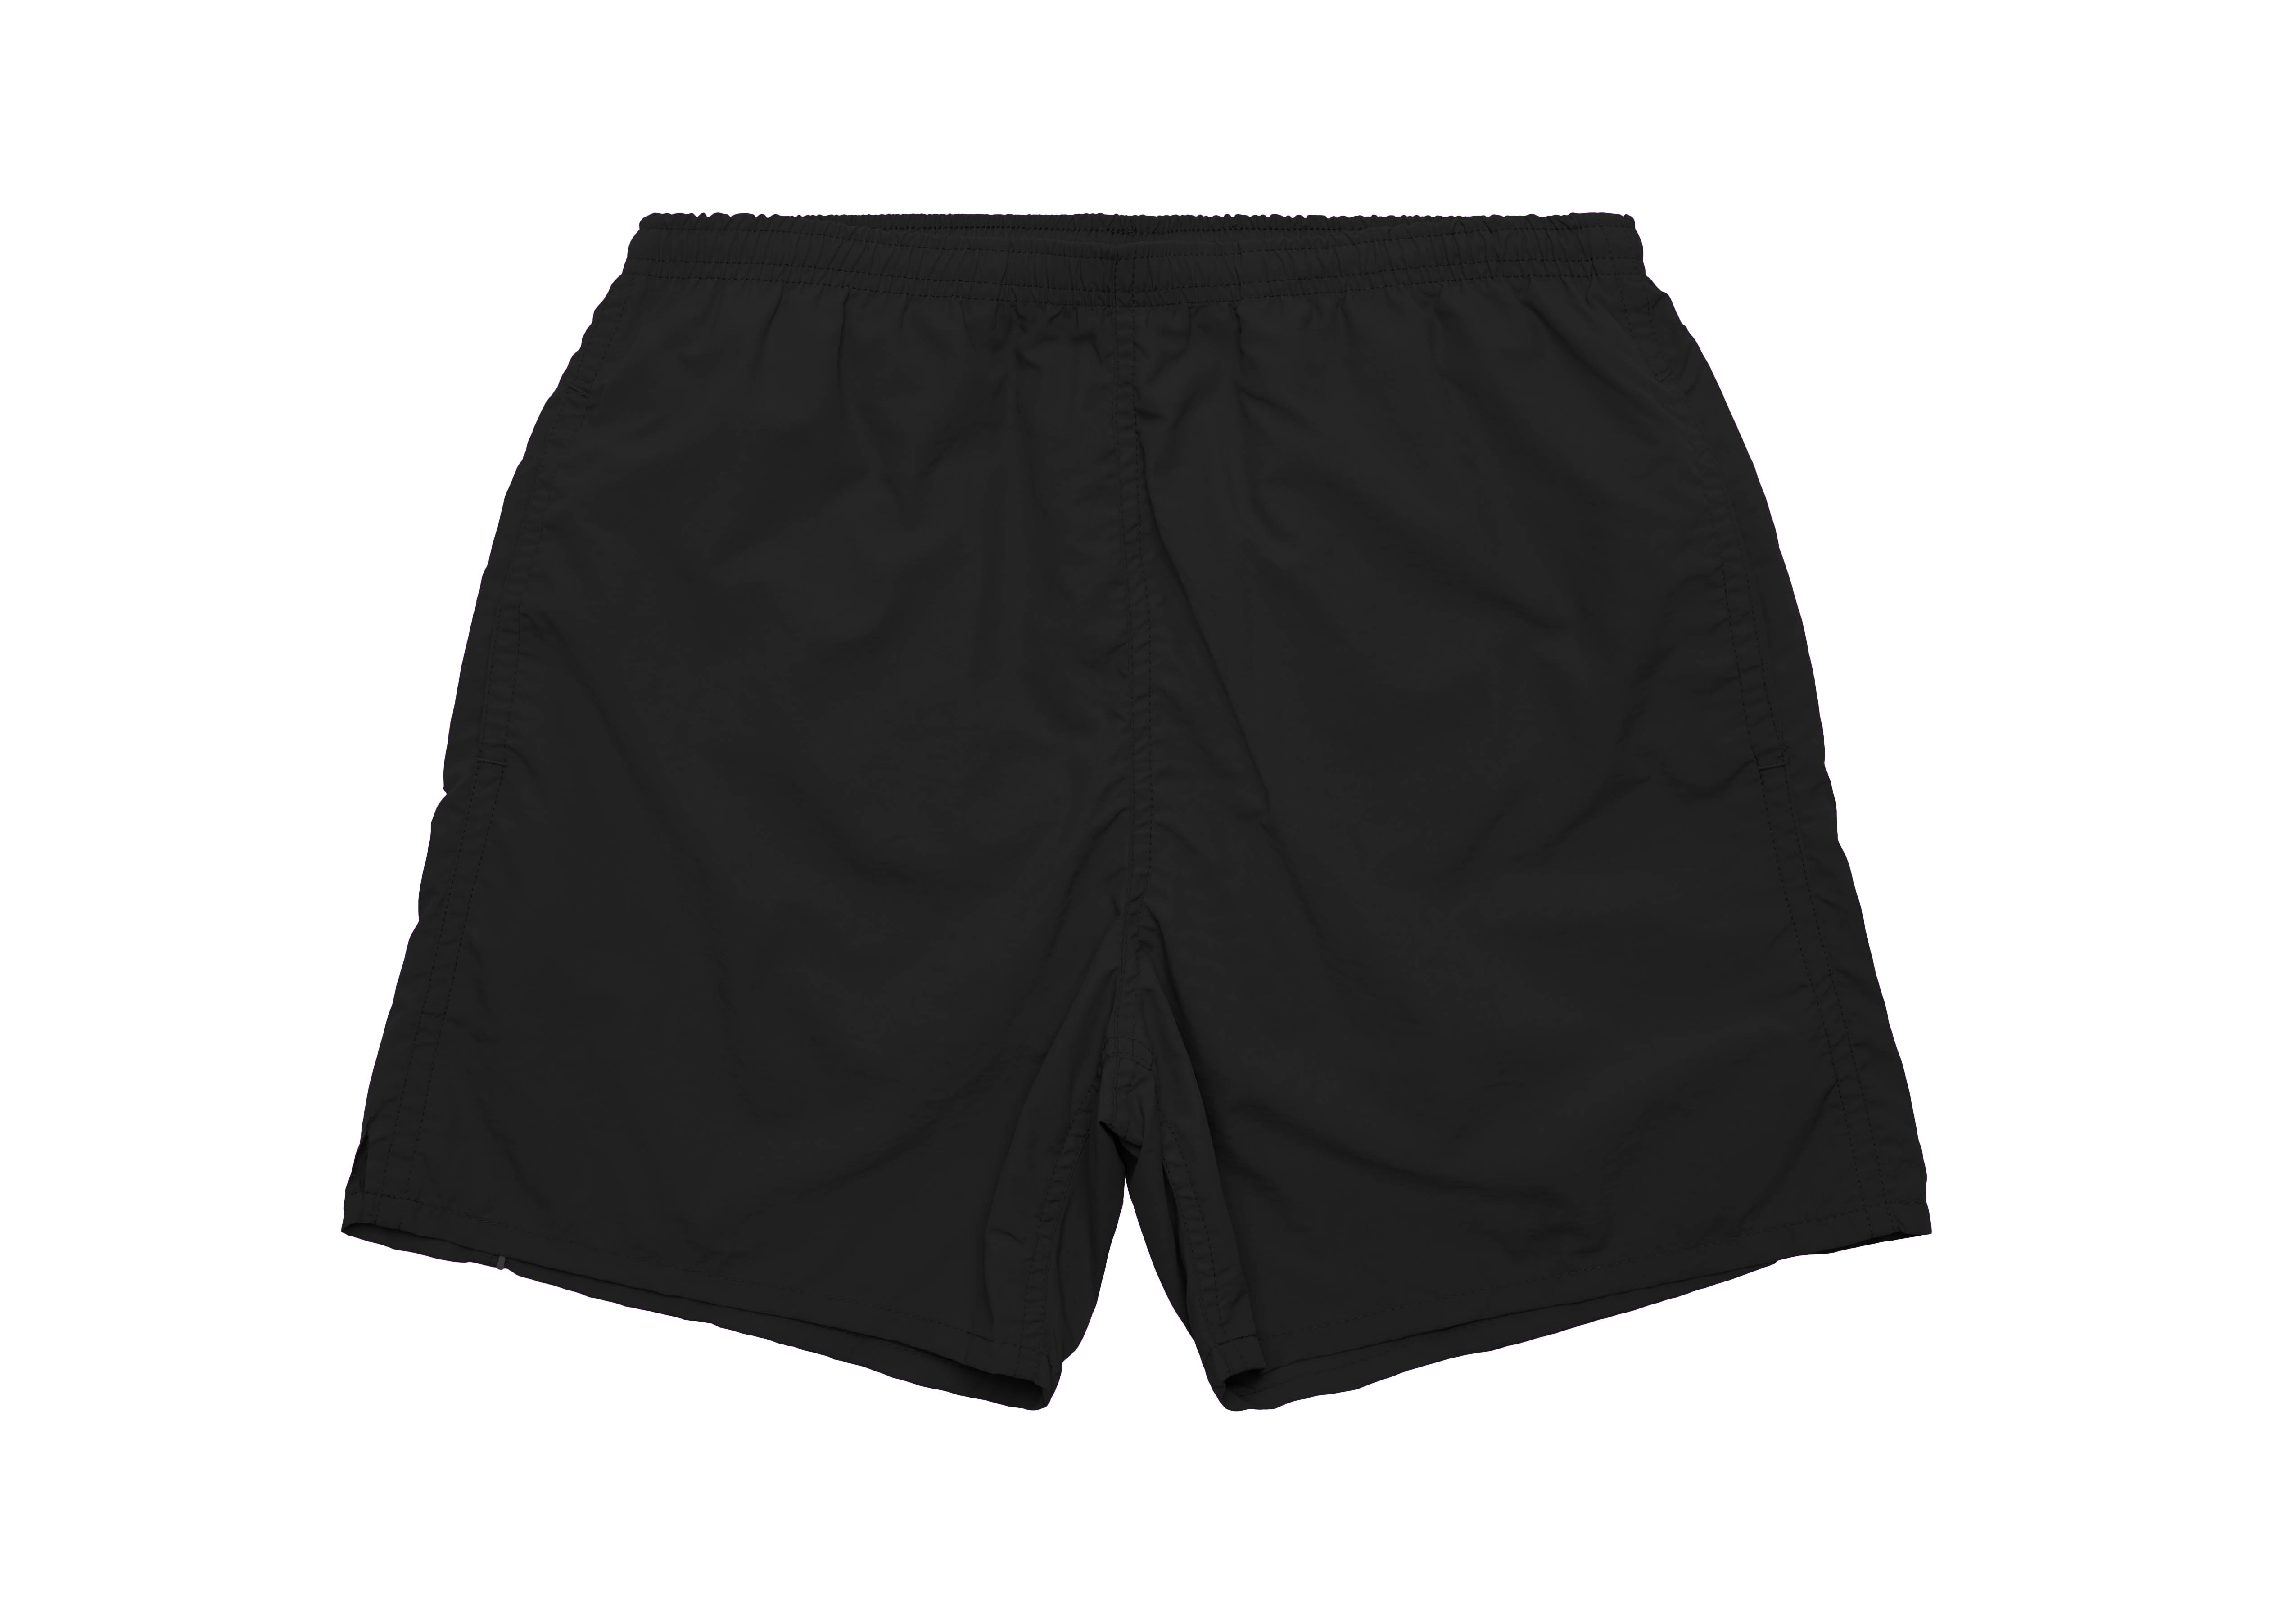 Supreme Arc Water Short Red Men's - SS22 - US